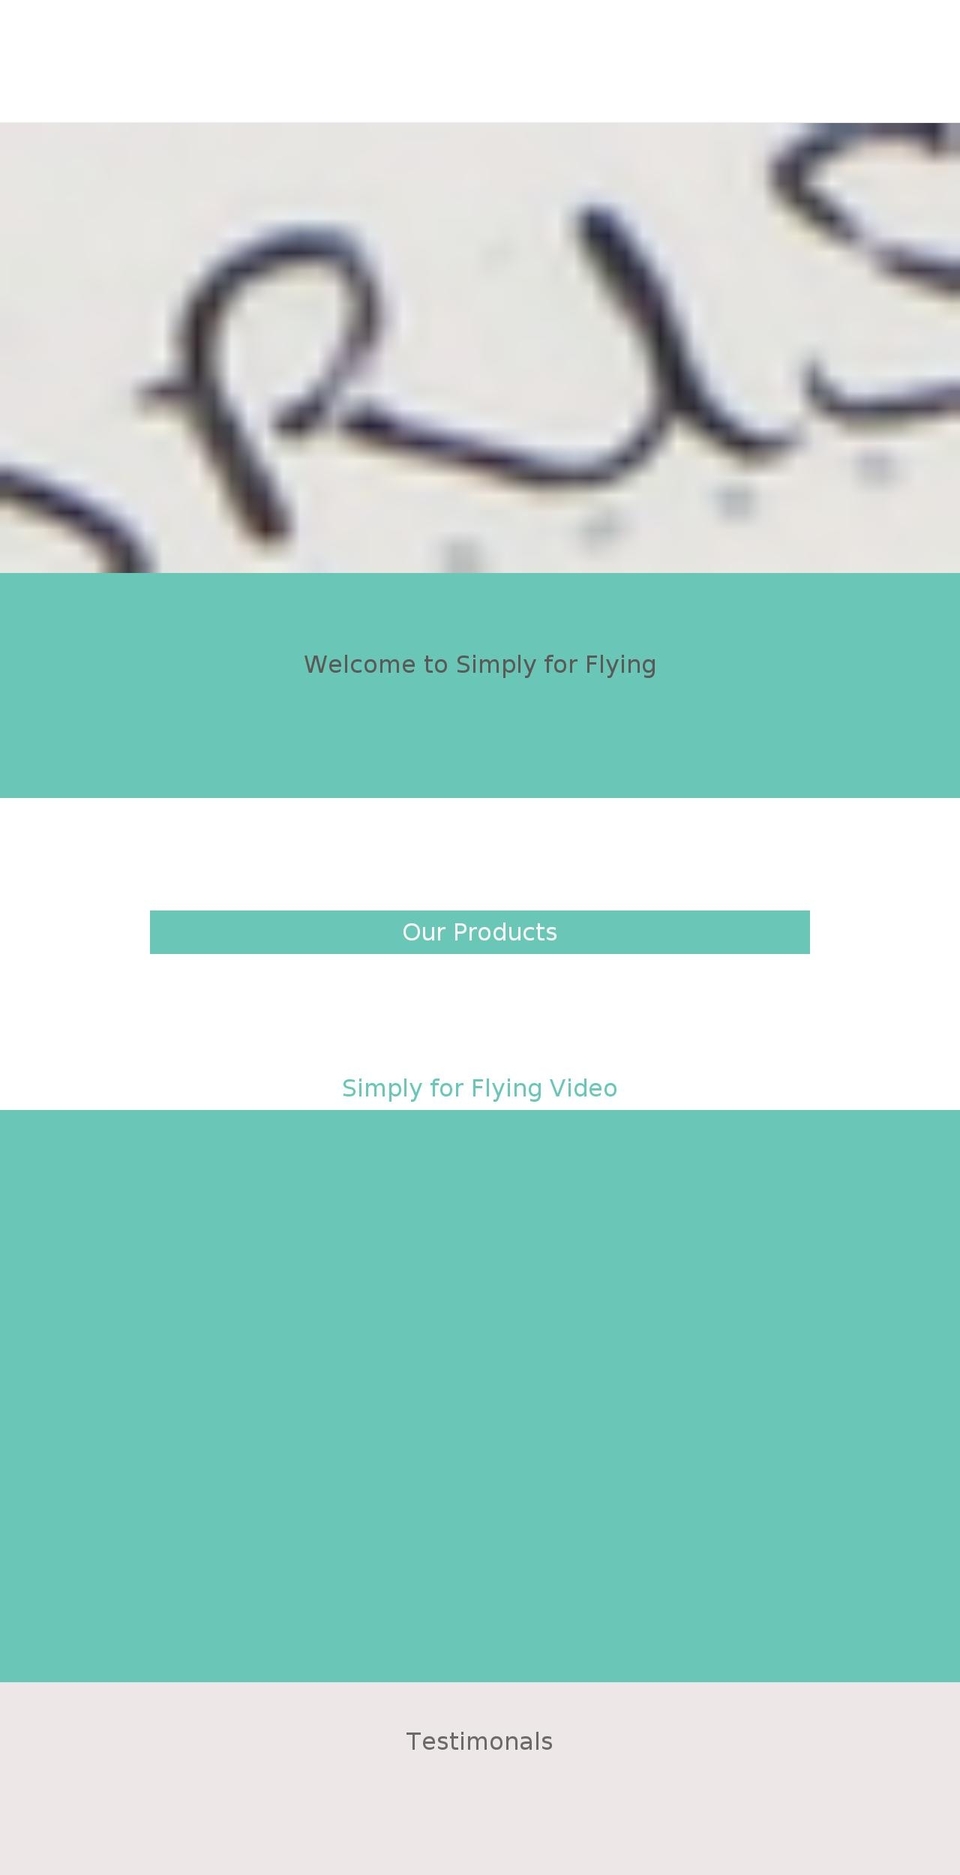 Local Shopify theme site example simplyforflying.com